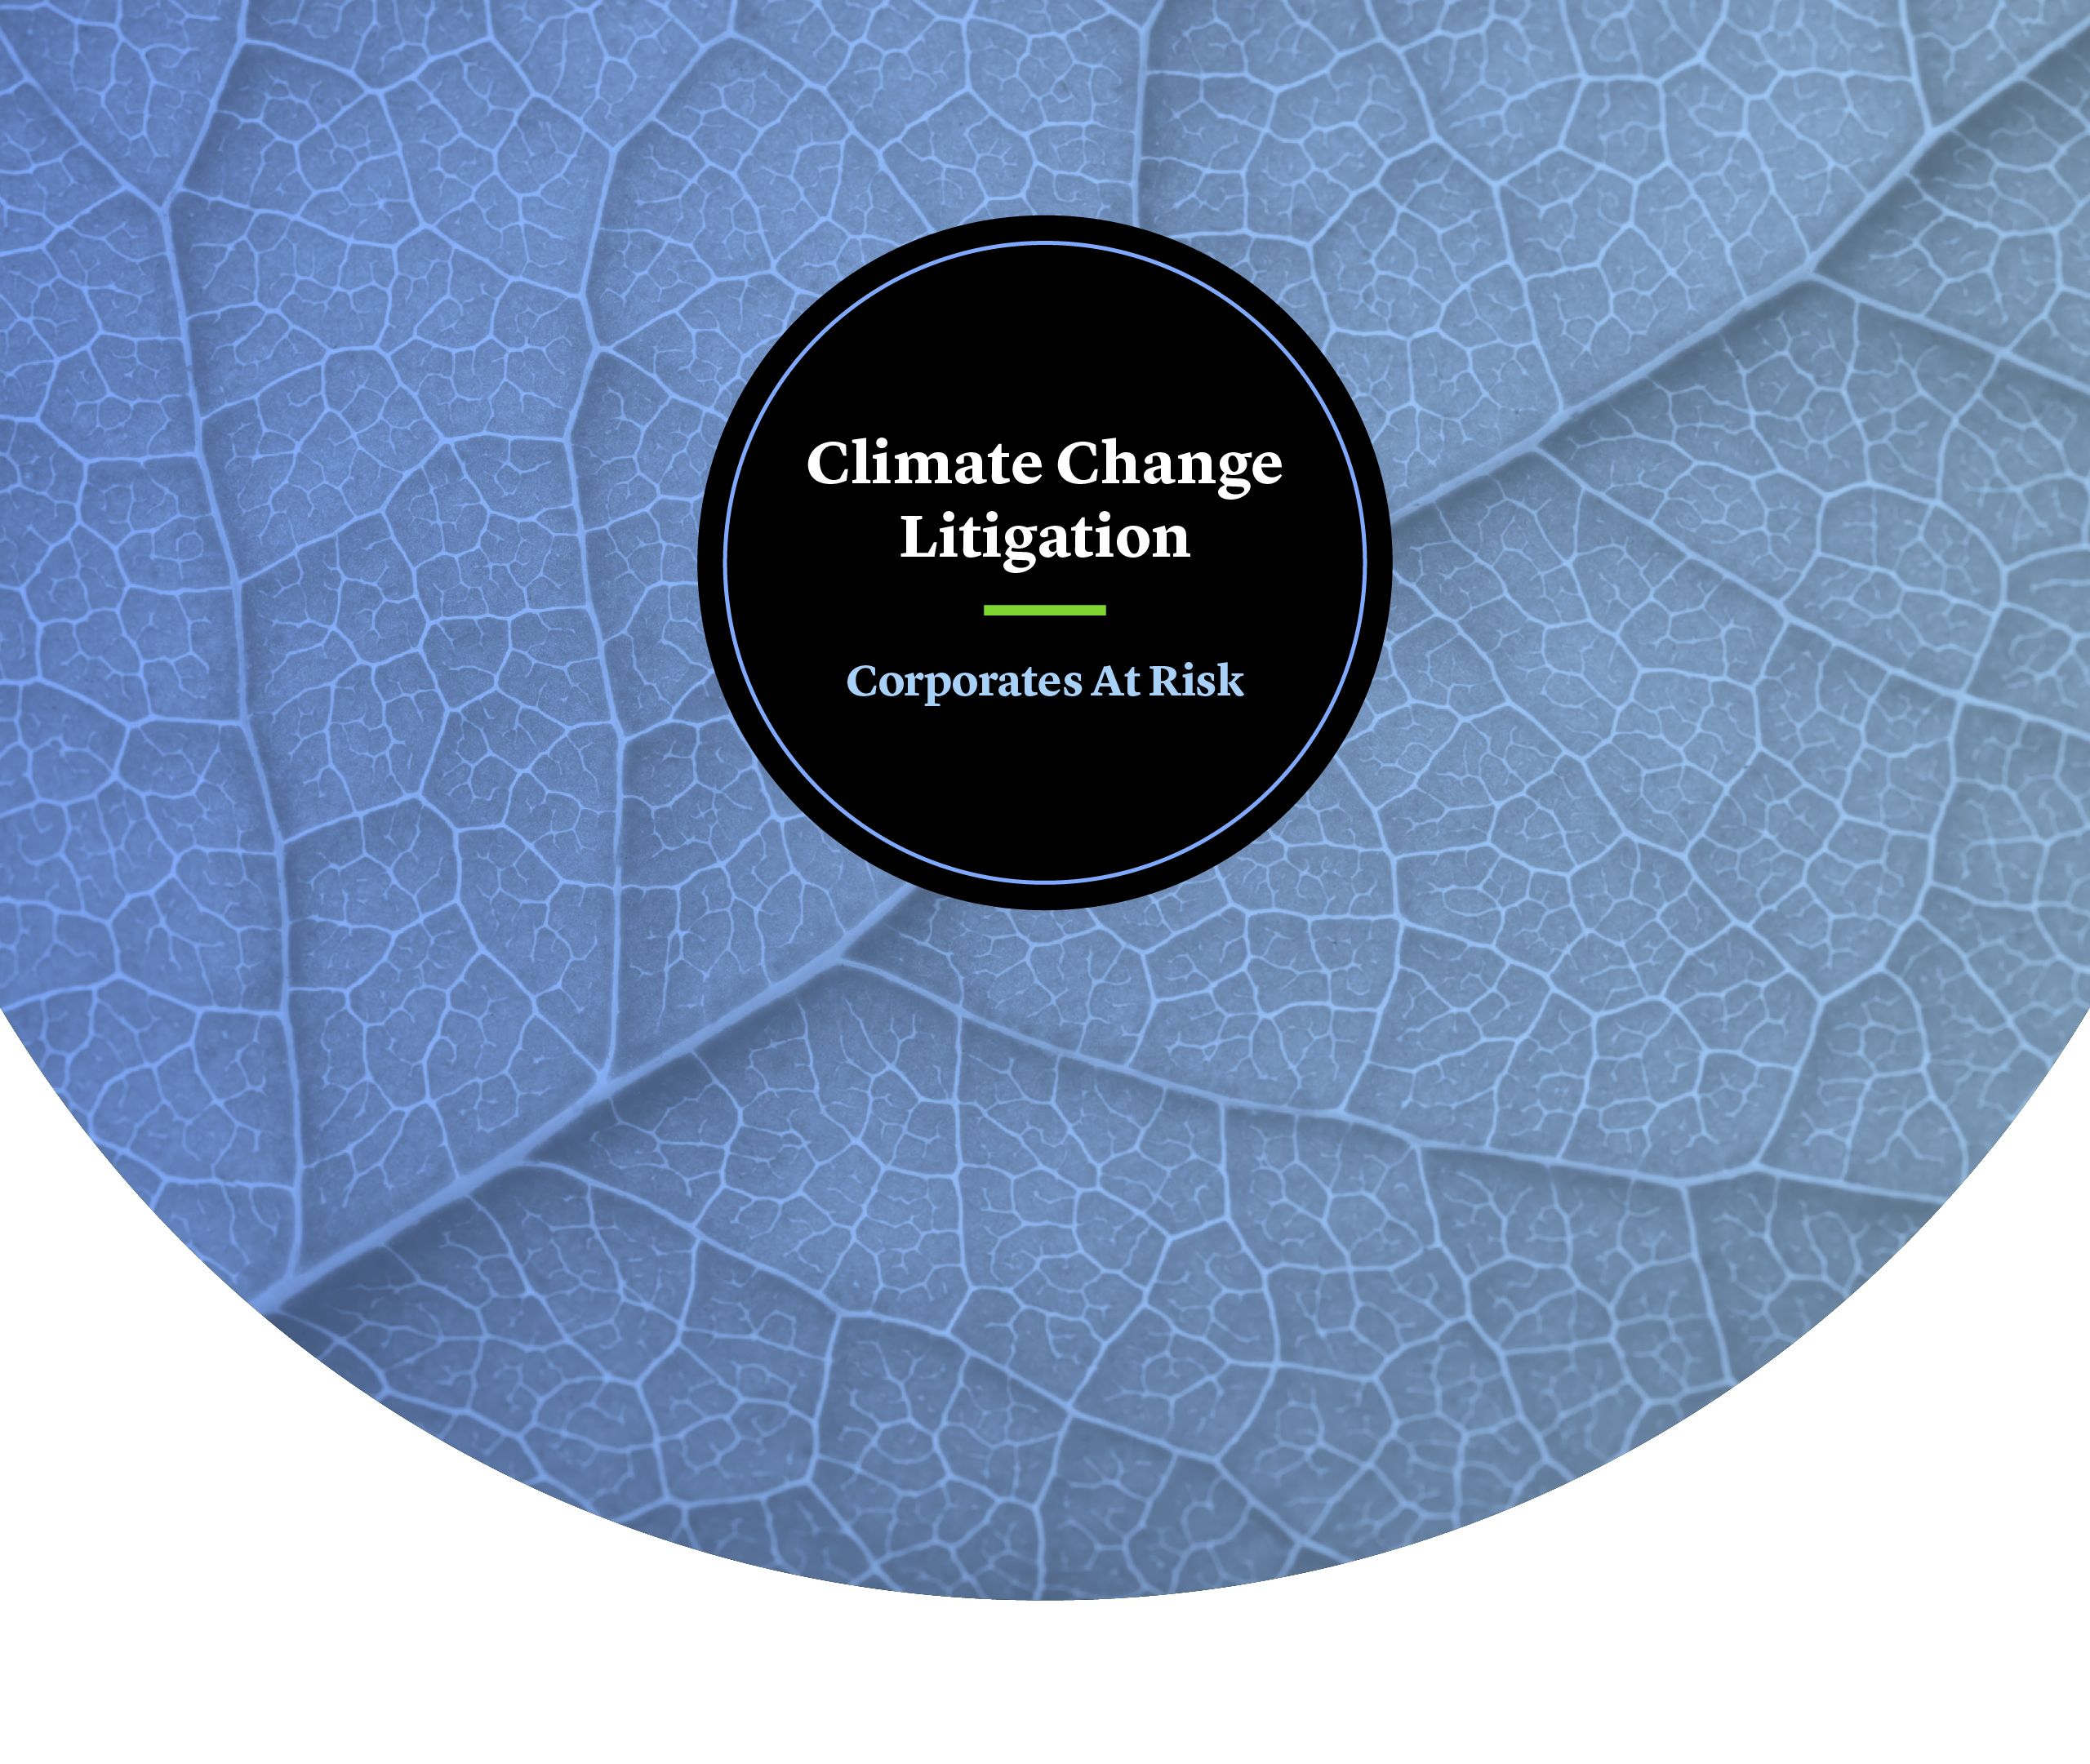 Climate Change Litigation: Corporate and Board Members At Risk